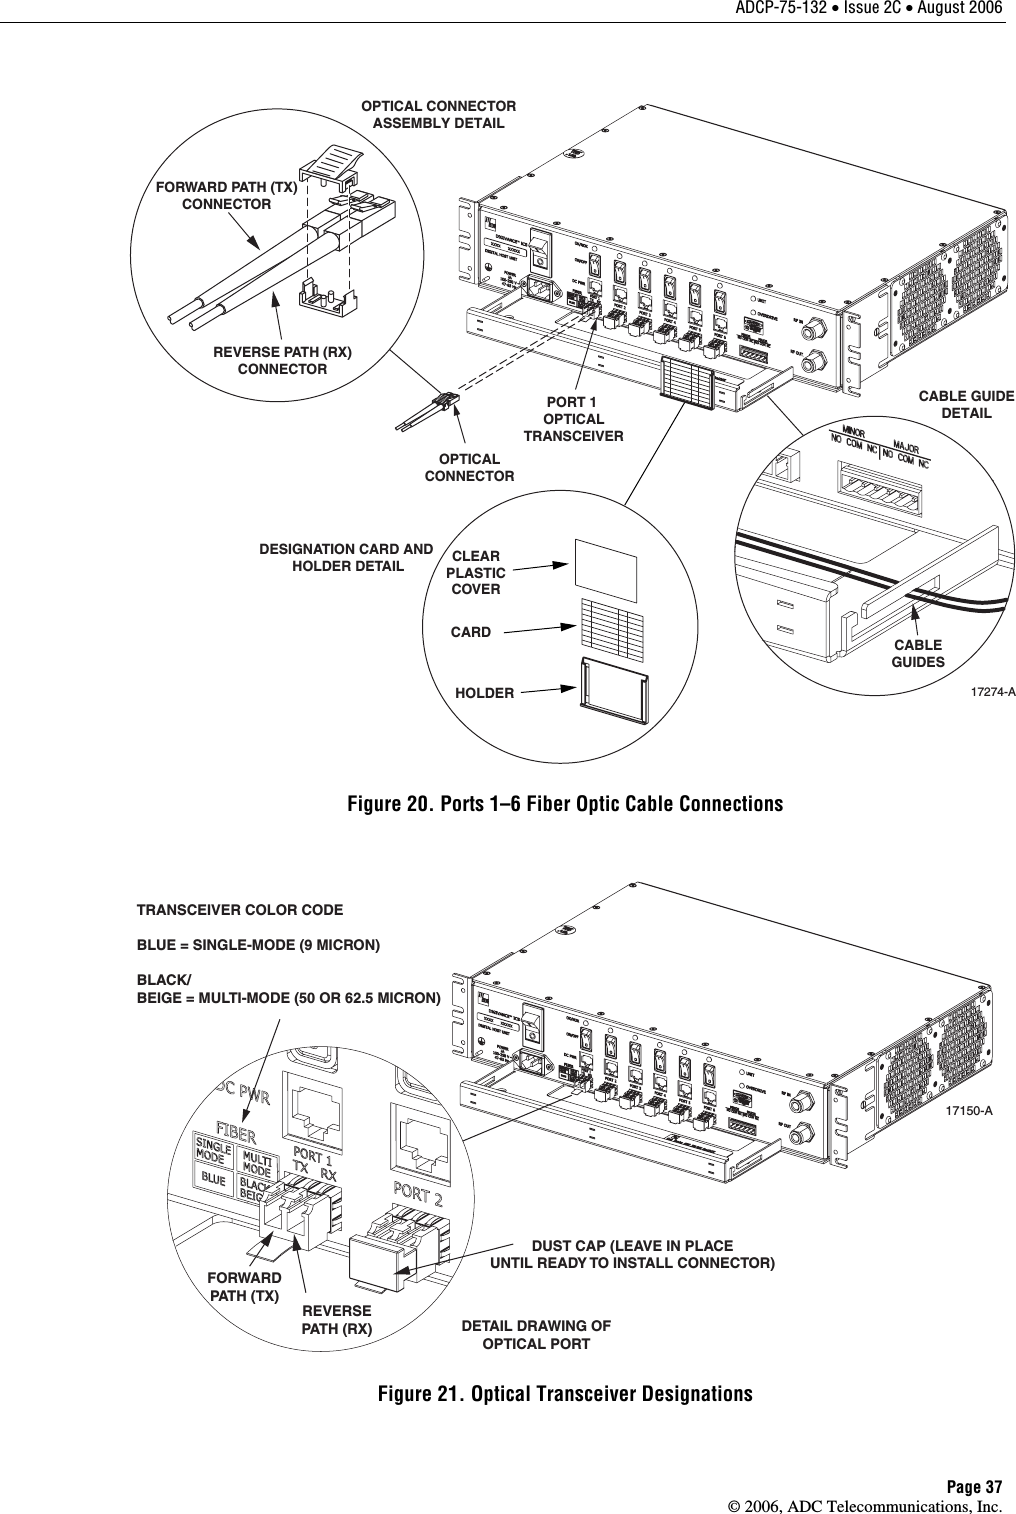 ADCP-75-132 • Issue 2C • August 2006 Page 37 © 2006, ADC Telecommunications, Inc. 17274-AREVERSE PATH (RX)CONNECTORFORWARD PATH (TX)CONNECTOROPTICAL CONNECTORASSEMBLY DETAILPORT 1 OPTICALTRANSCEIVEROPTICALCONNECTORCABLEGUIDESCABLE GUIDEDETAILDESIGNATION CARD AND HOLDER DETAILHOLDERCARDCLEARPLASTICCOVER Figure 20. Ports 1–6 Fiber Optic Cable Connections 17150-ADETAIL DRAWING OFOPTICAL PORTREVERSEPATH (RX)FORWARDPATH (TX)DUST CAP (LEAVE IN PLACEUNTIL READY TO INSTALL CONNECTOR)TRANSCEIVER COLOR CODEBLUE = SINGLE-MODE (9 MICRON)BLACK/BEIGE = MULTI-MODE (50 OR 62.5 MICRON) Figure 21. Optical Transceiver Designations 